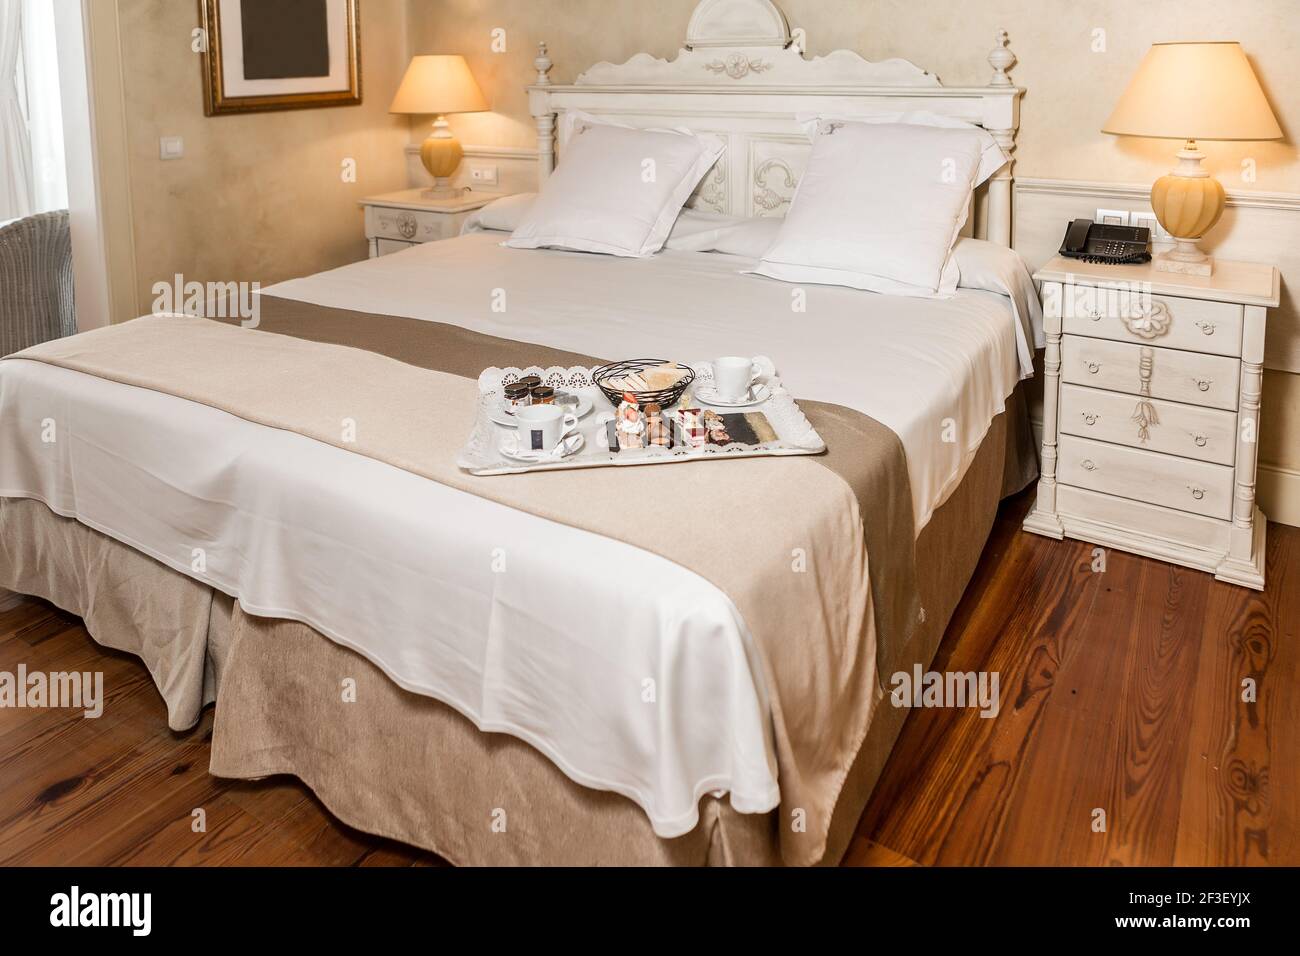 https://c8.alamy.com/comp/2F3EYJX/tray-with-assorted-sweet-food-for-breakfast-placed-on-luxury-bed-in-hotel-room-in-morning-2F3EYJX.jpg